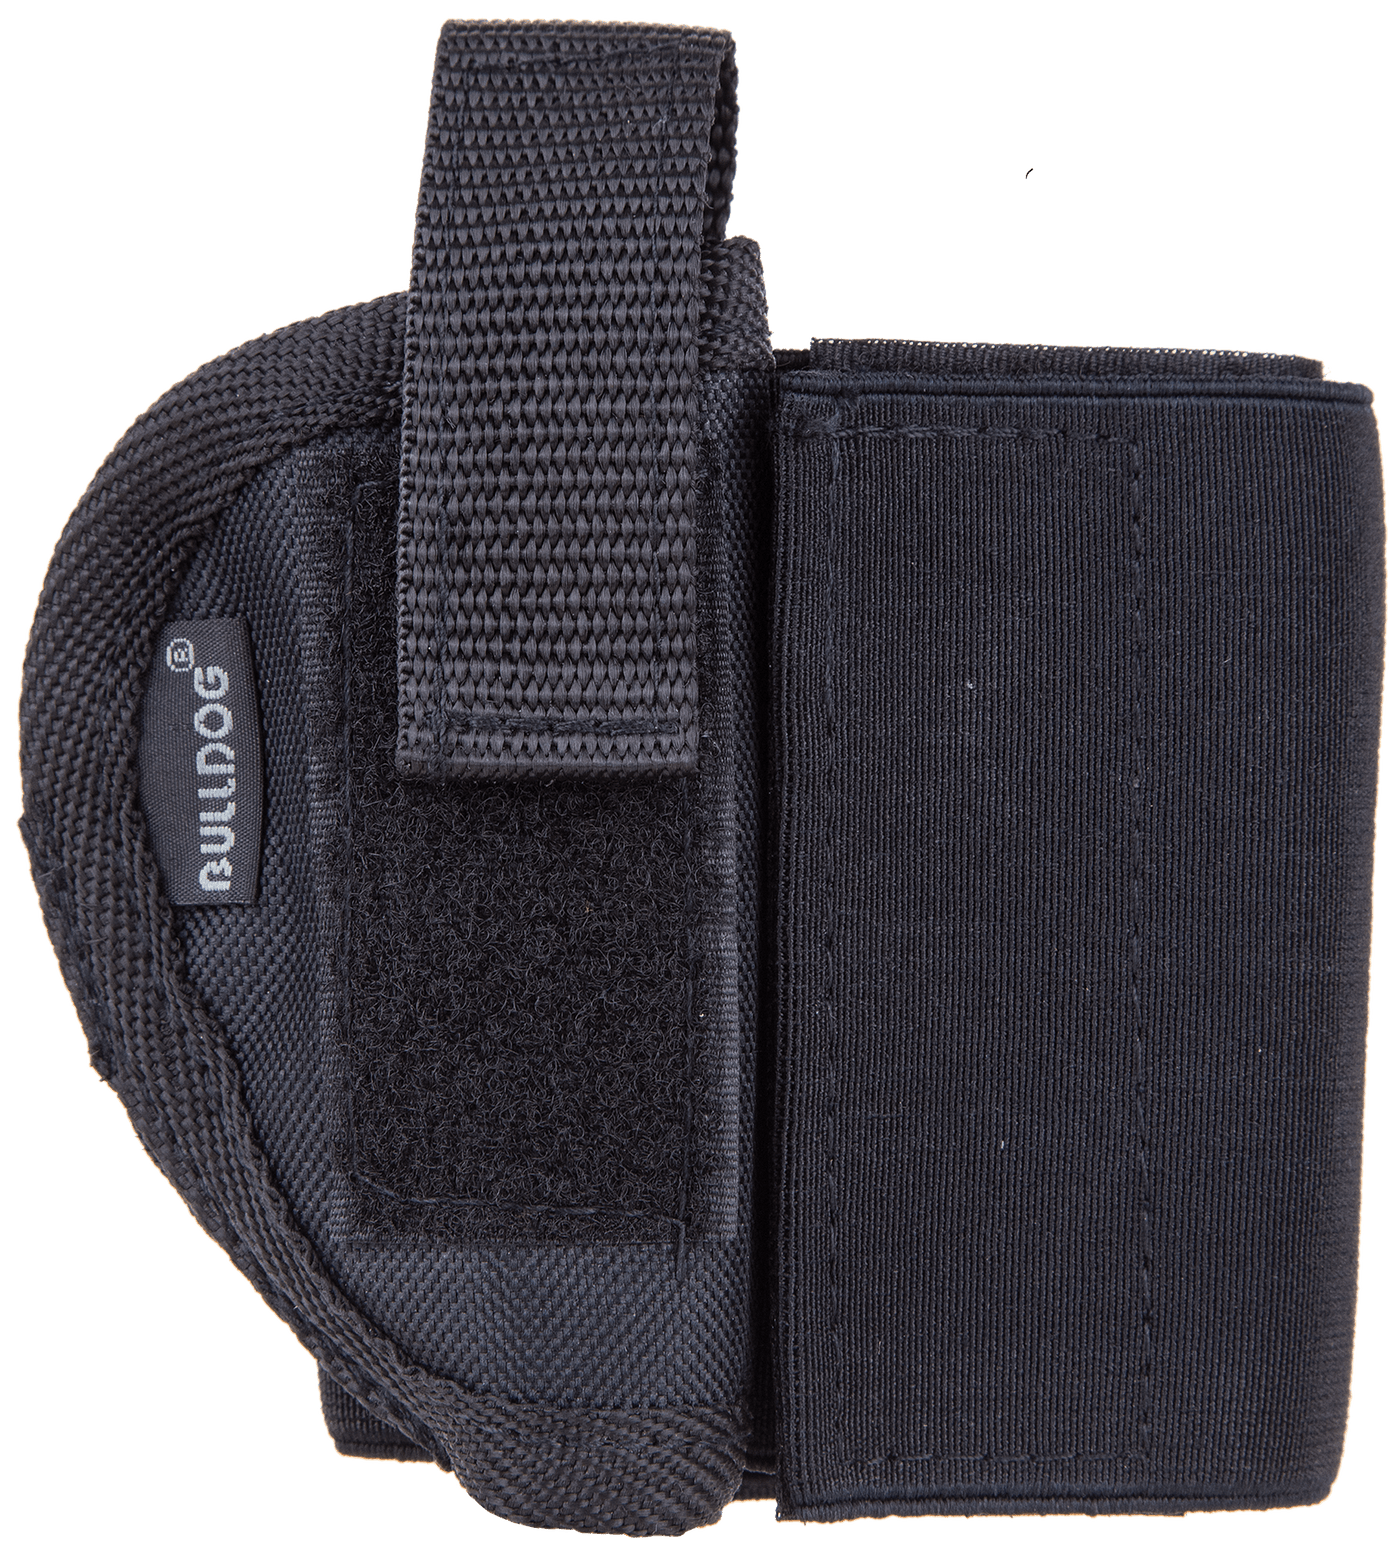 Bulldog Bulldog Ankle Holster Rh Black - Compact Autos W/2.5"-3.75" Bbl Holsters And Related Items